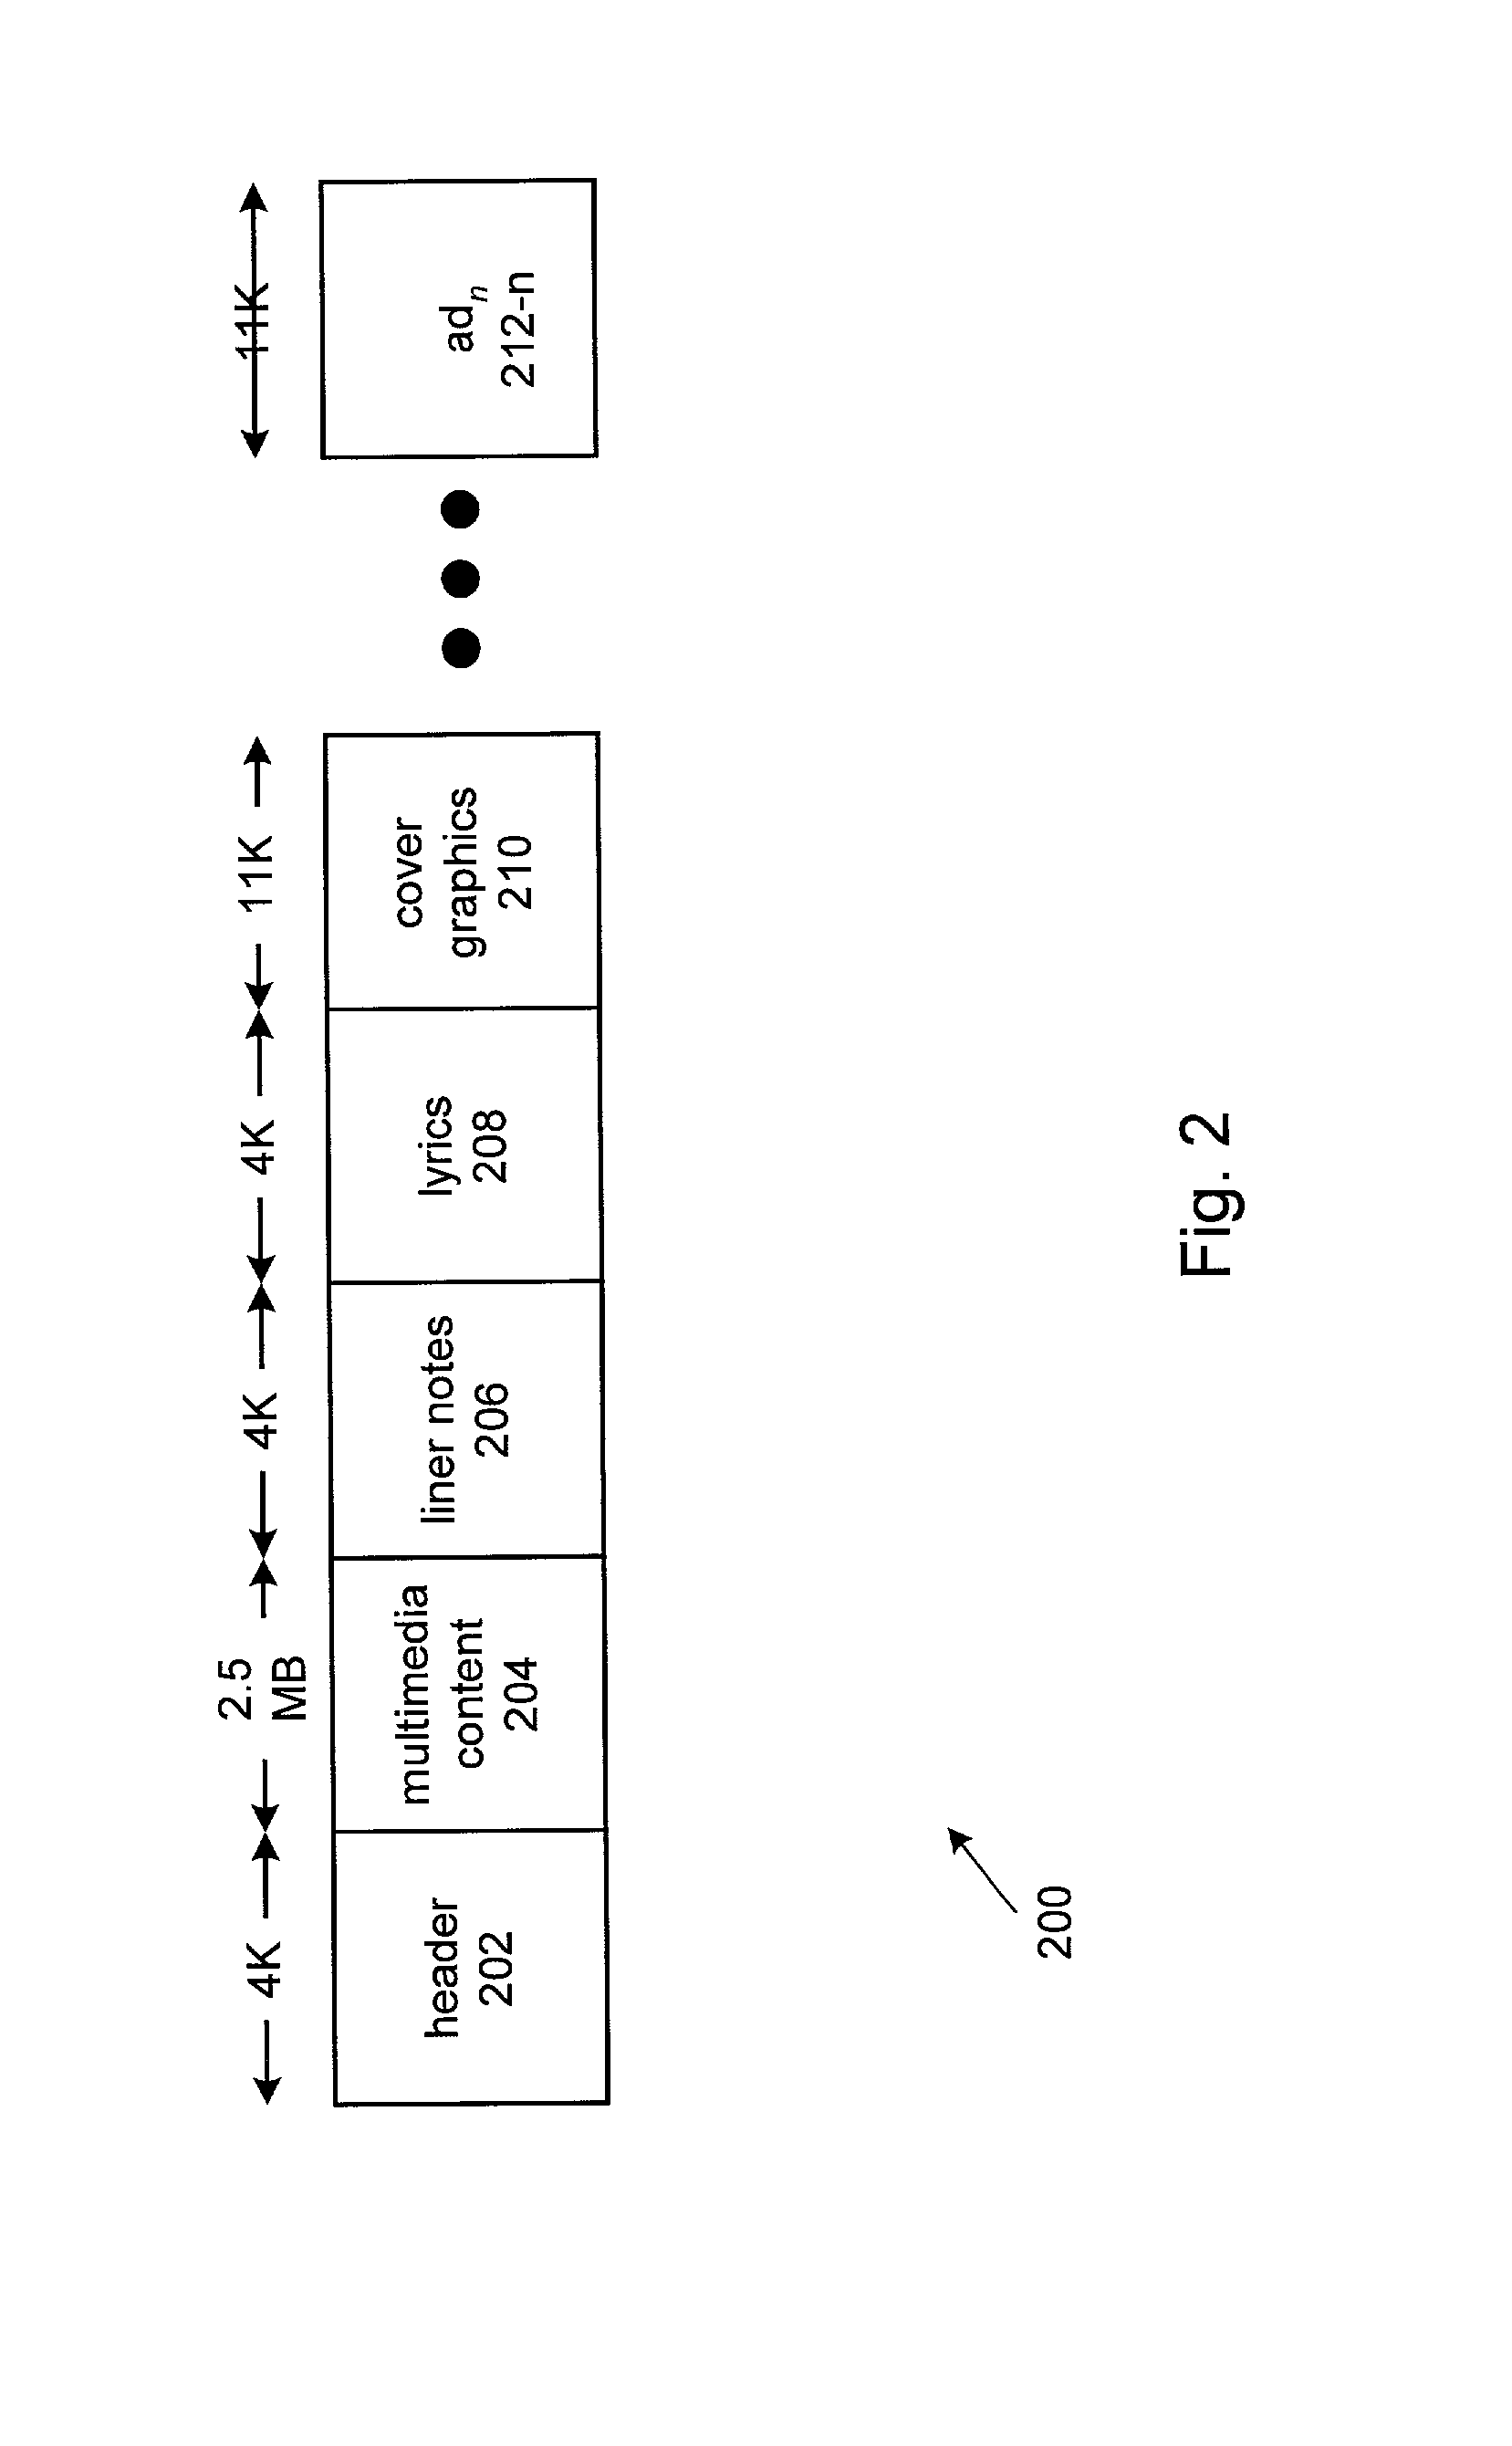 Method and apparatus for delivering digital multimedia content